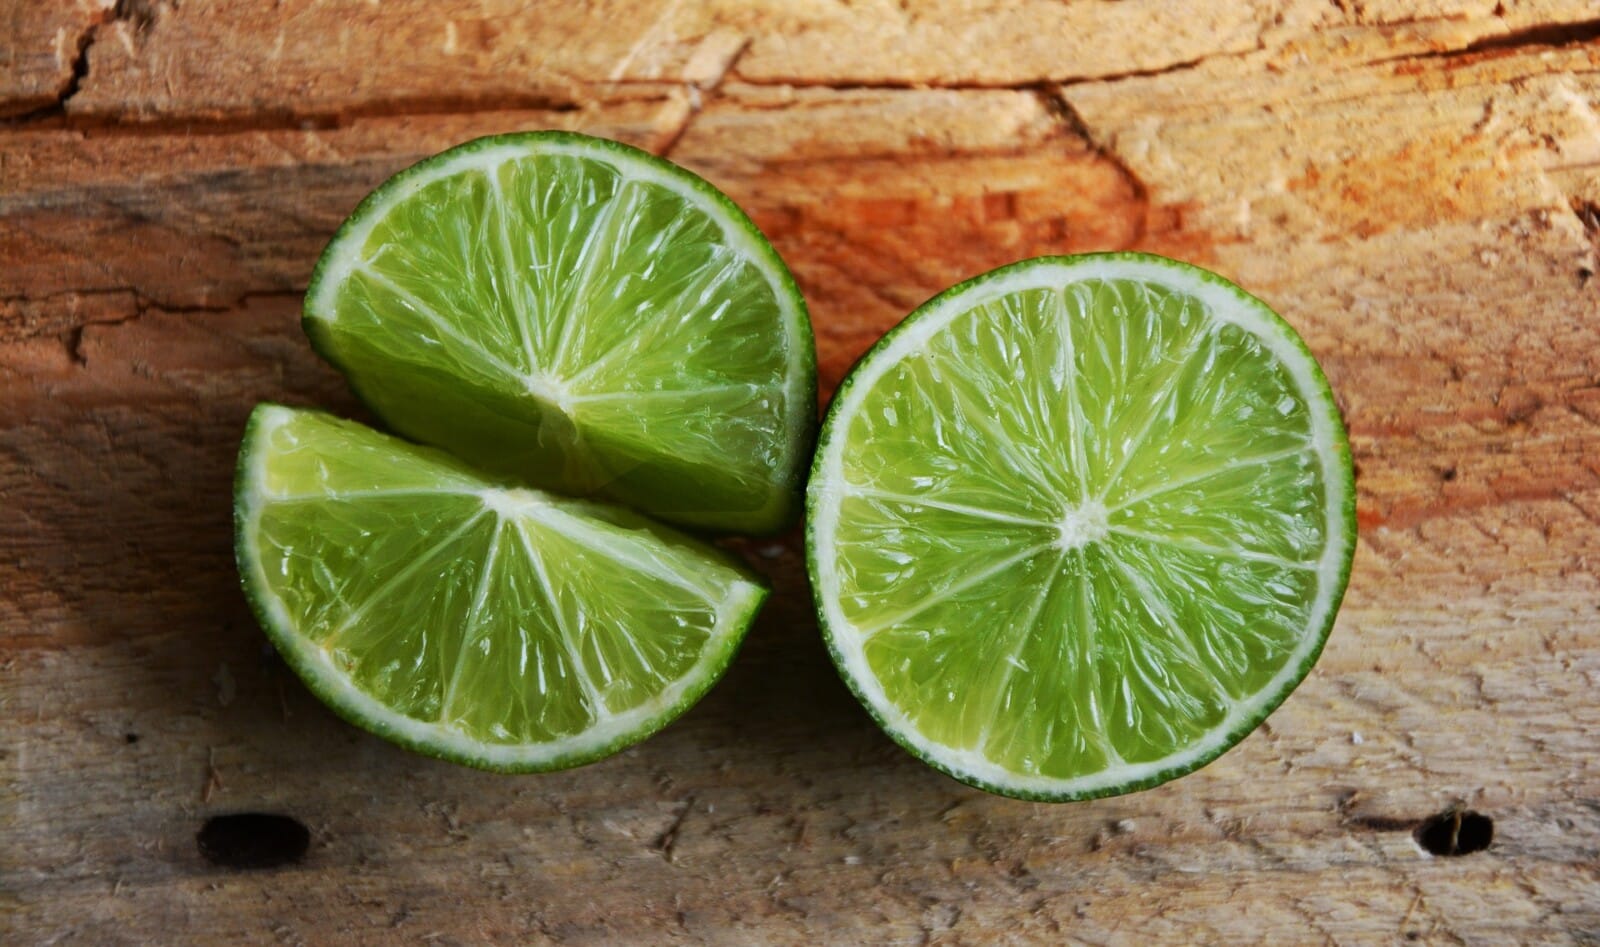 a lime, cut in half